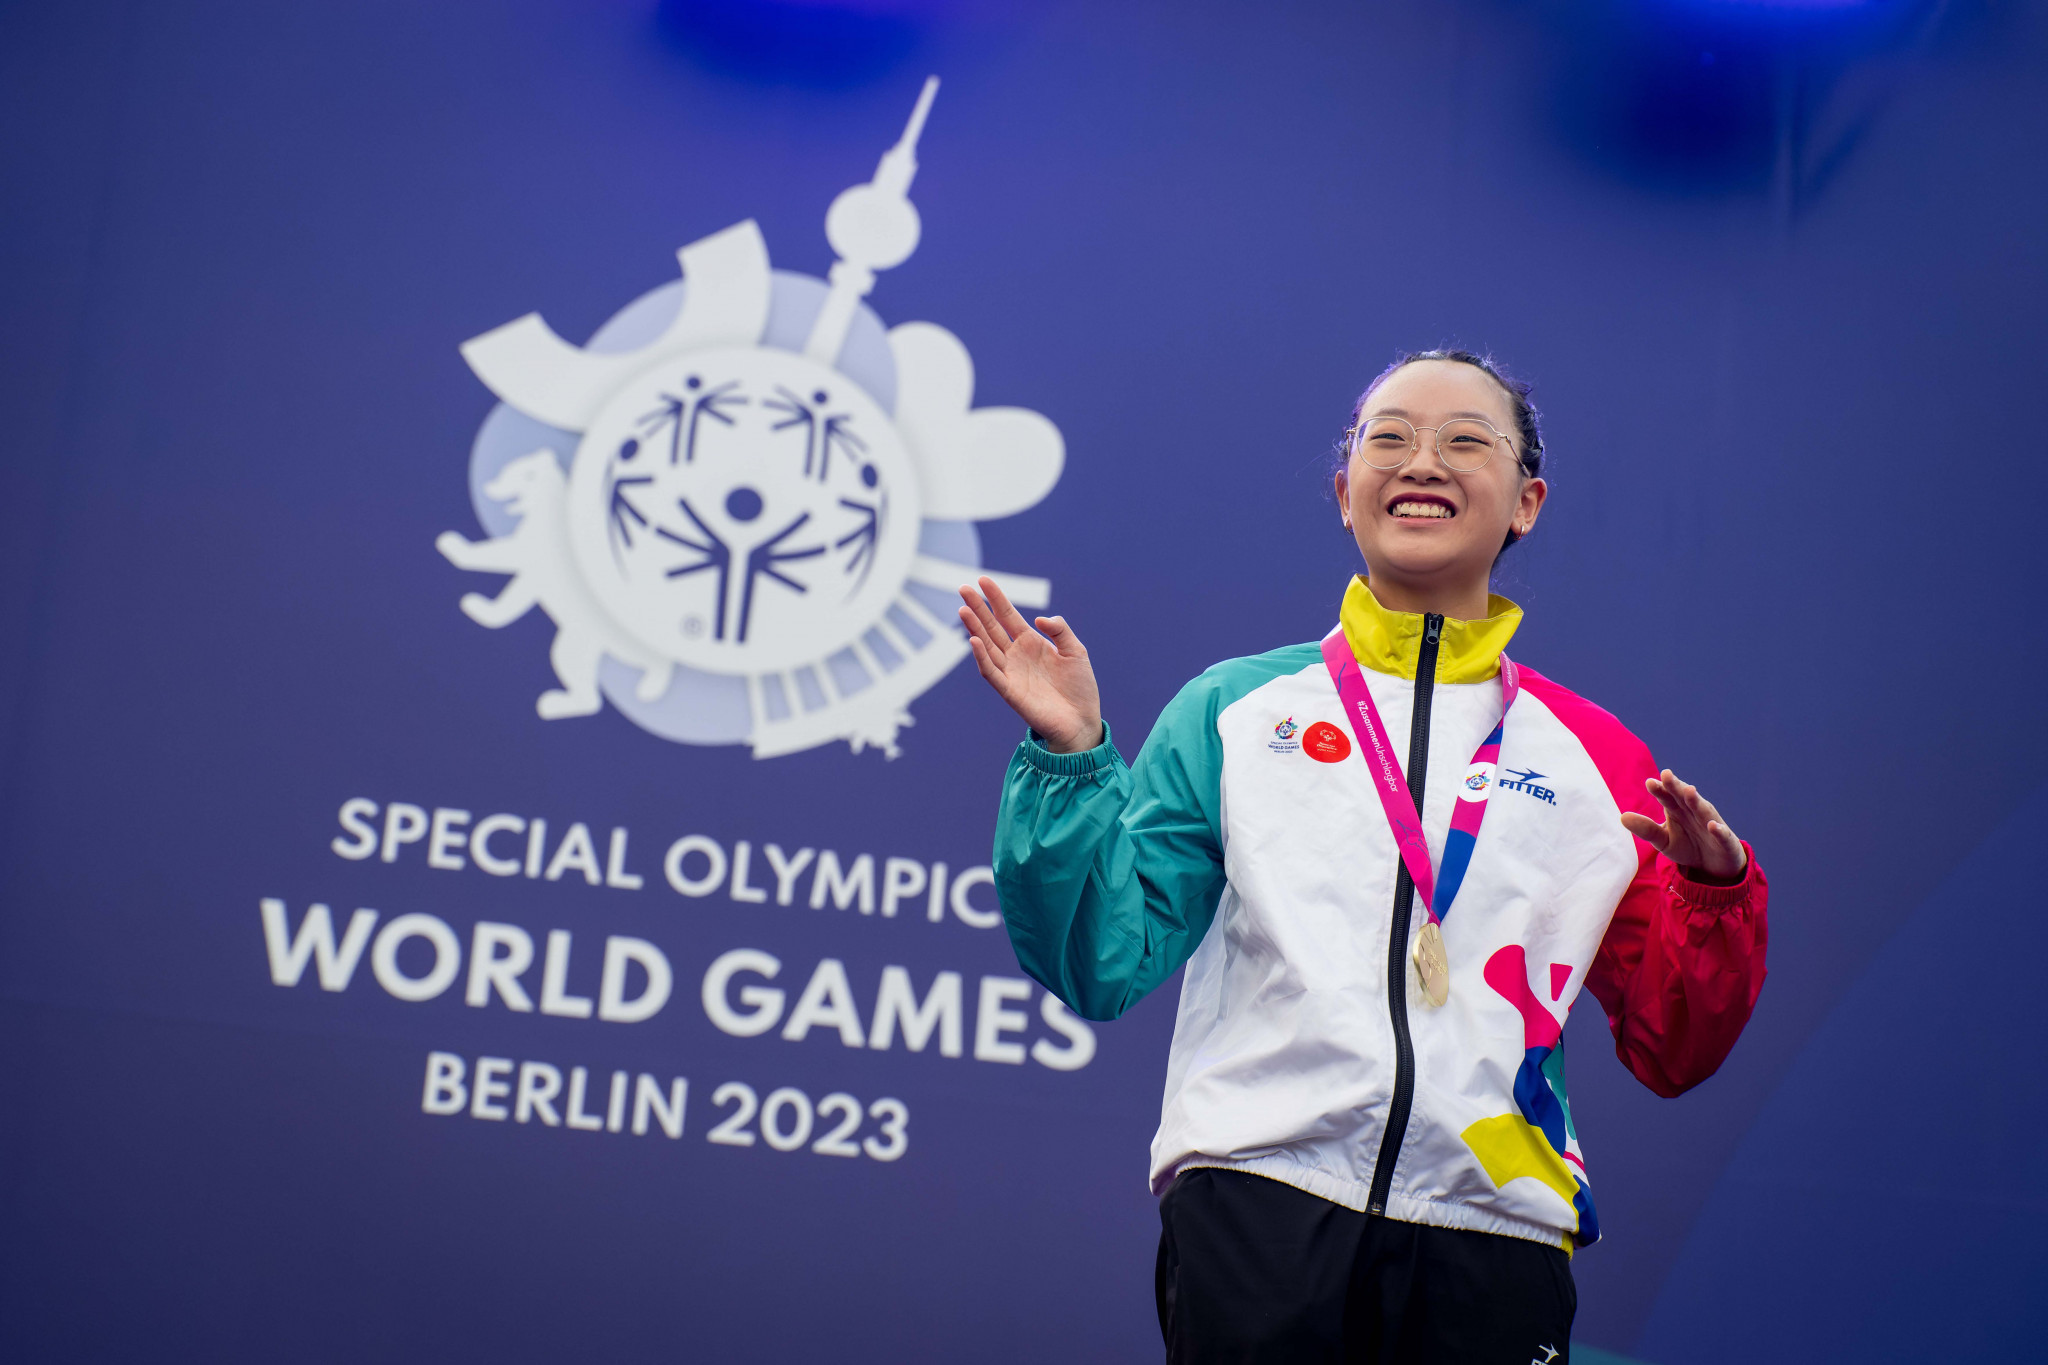 Hong Kong's Wai Cheuk-in was among the first gold medallists in rhythmic gymnastics ©Special Olympics World Games Berlin 2023